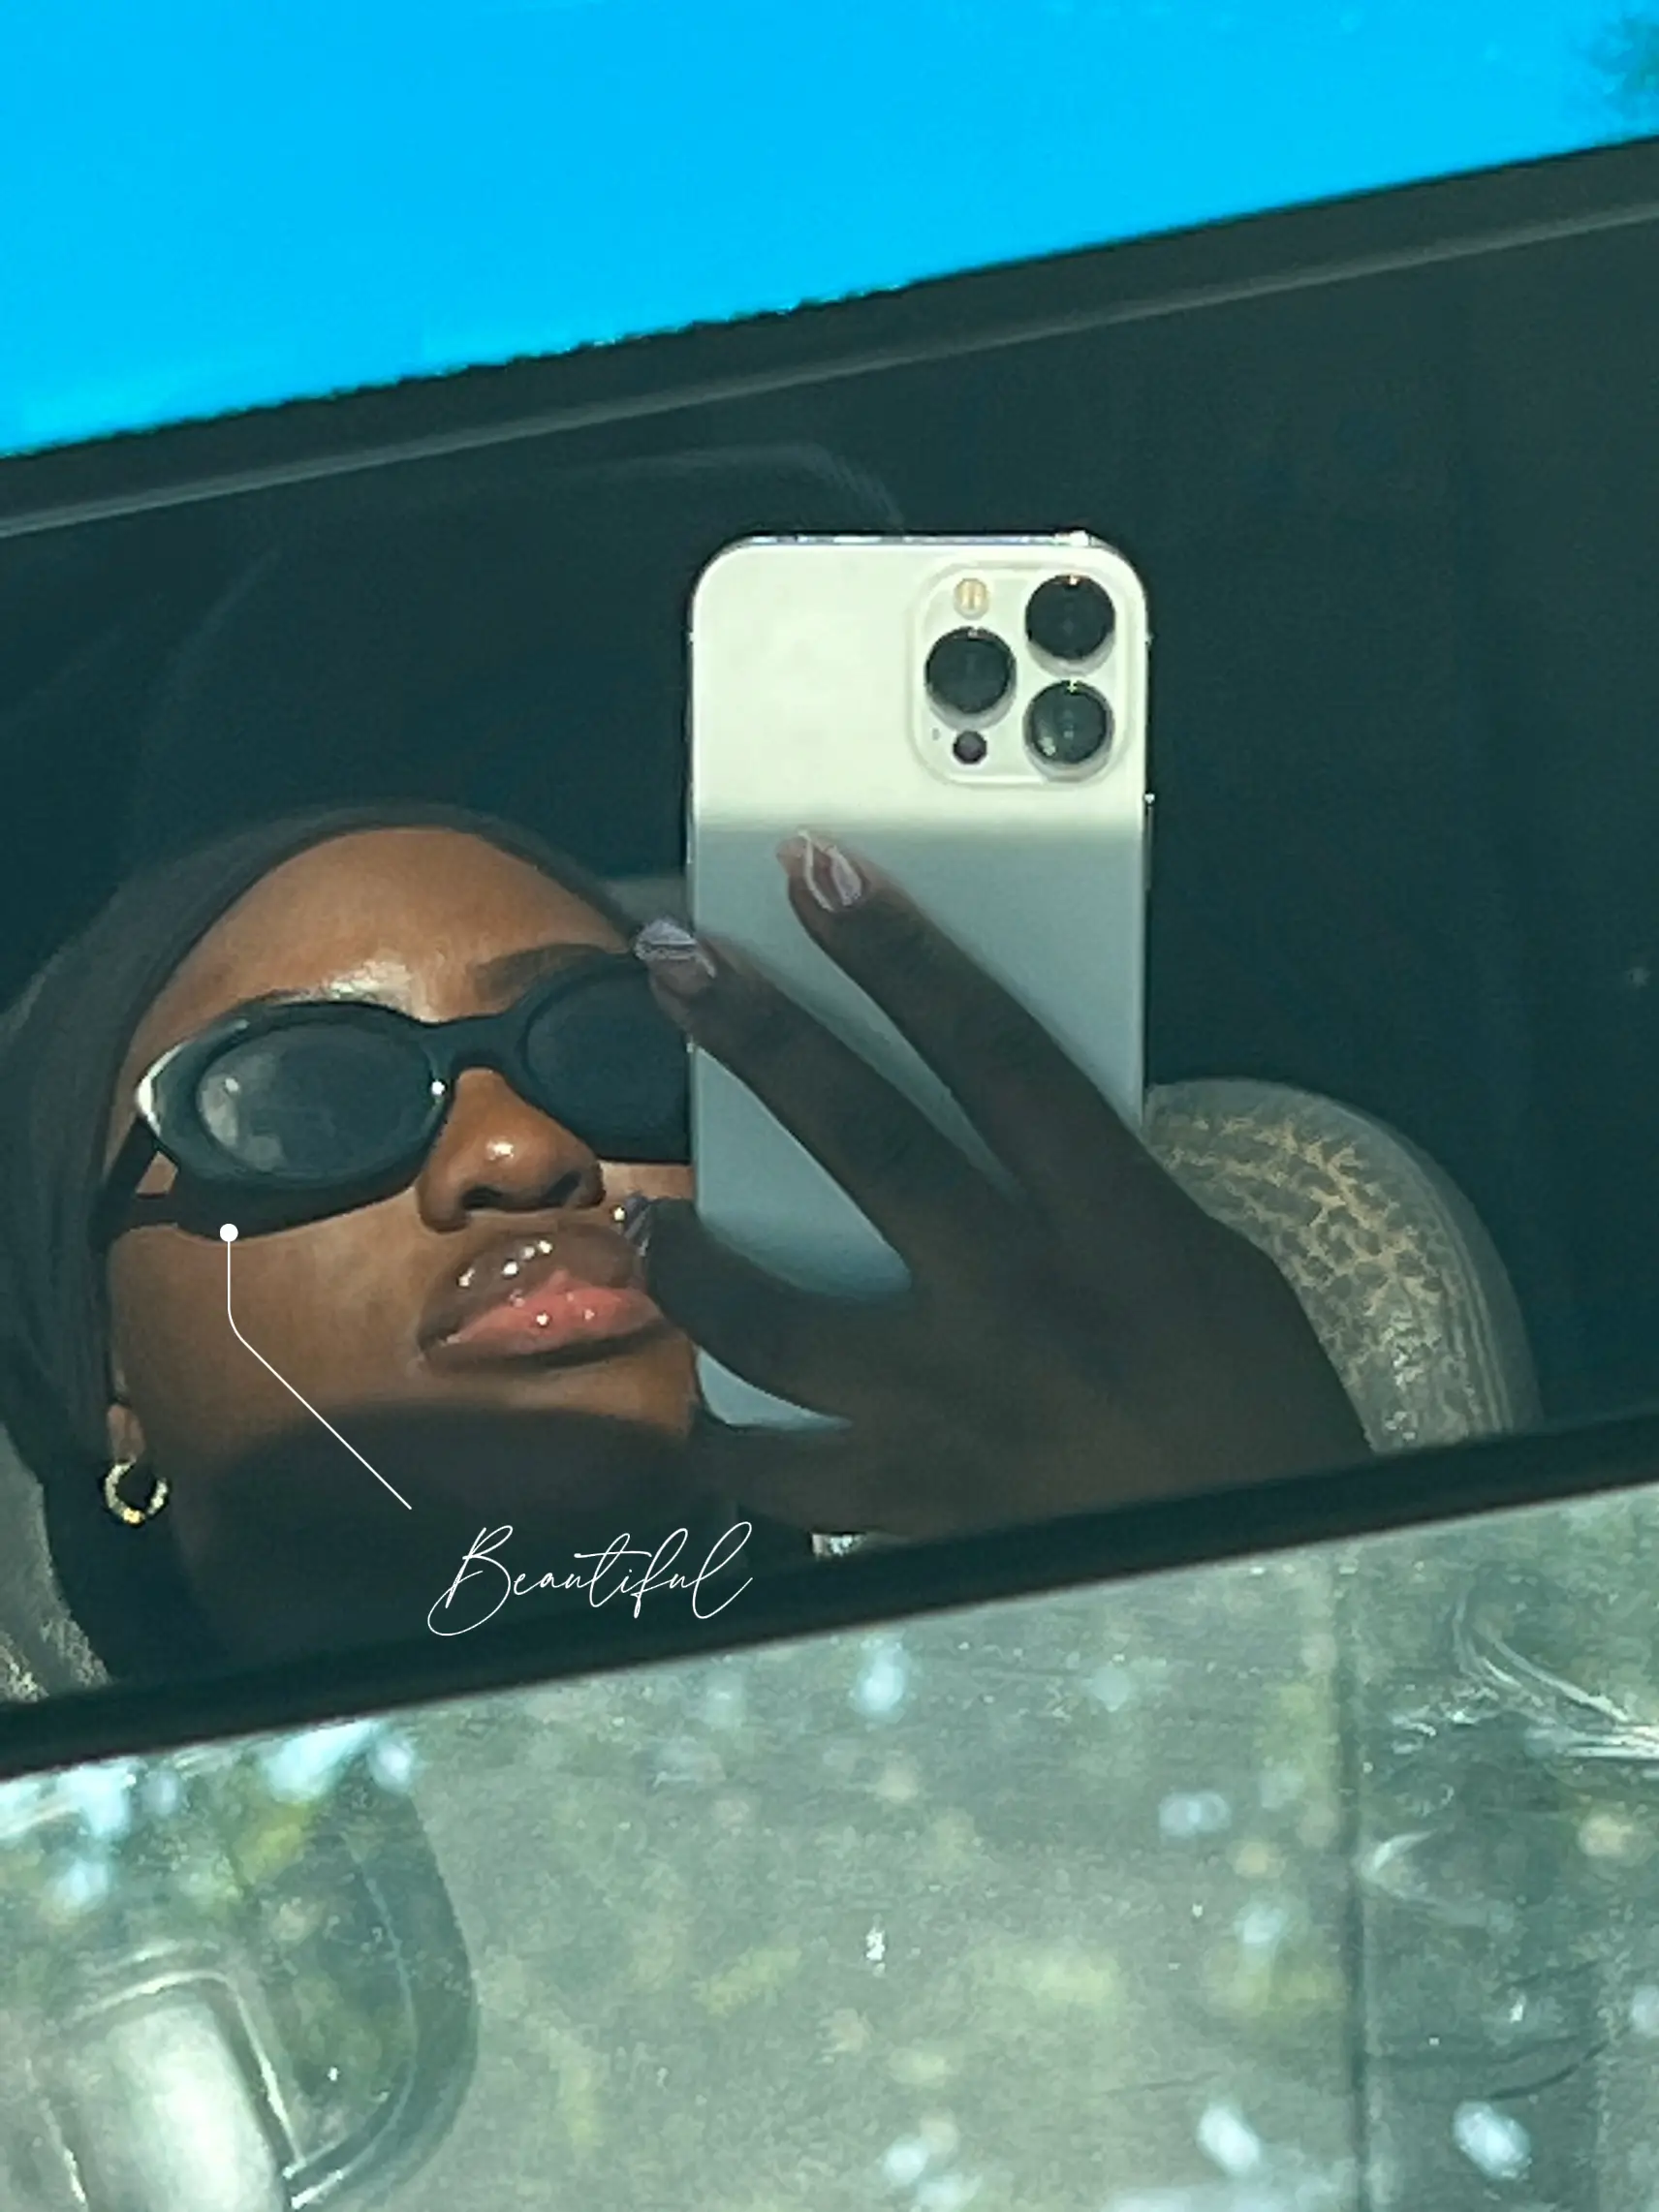  A woman wearing sunglasses and a black headband is taking a selfie in the mirror.